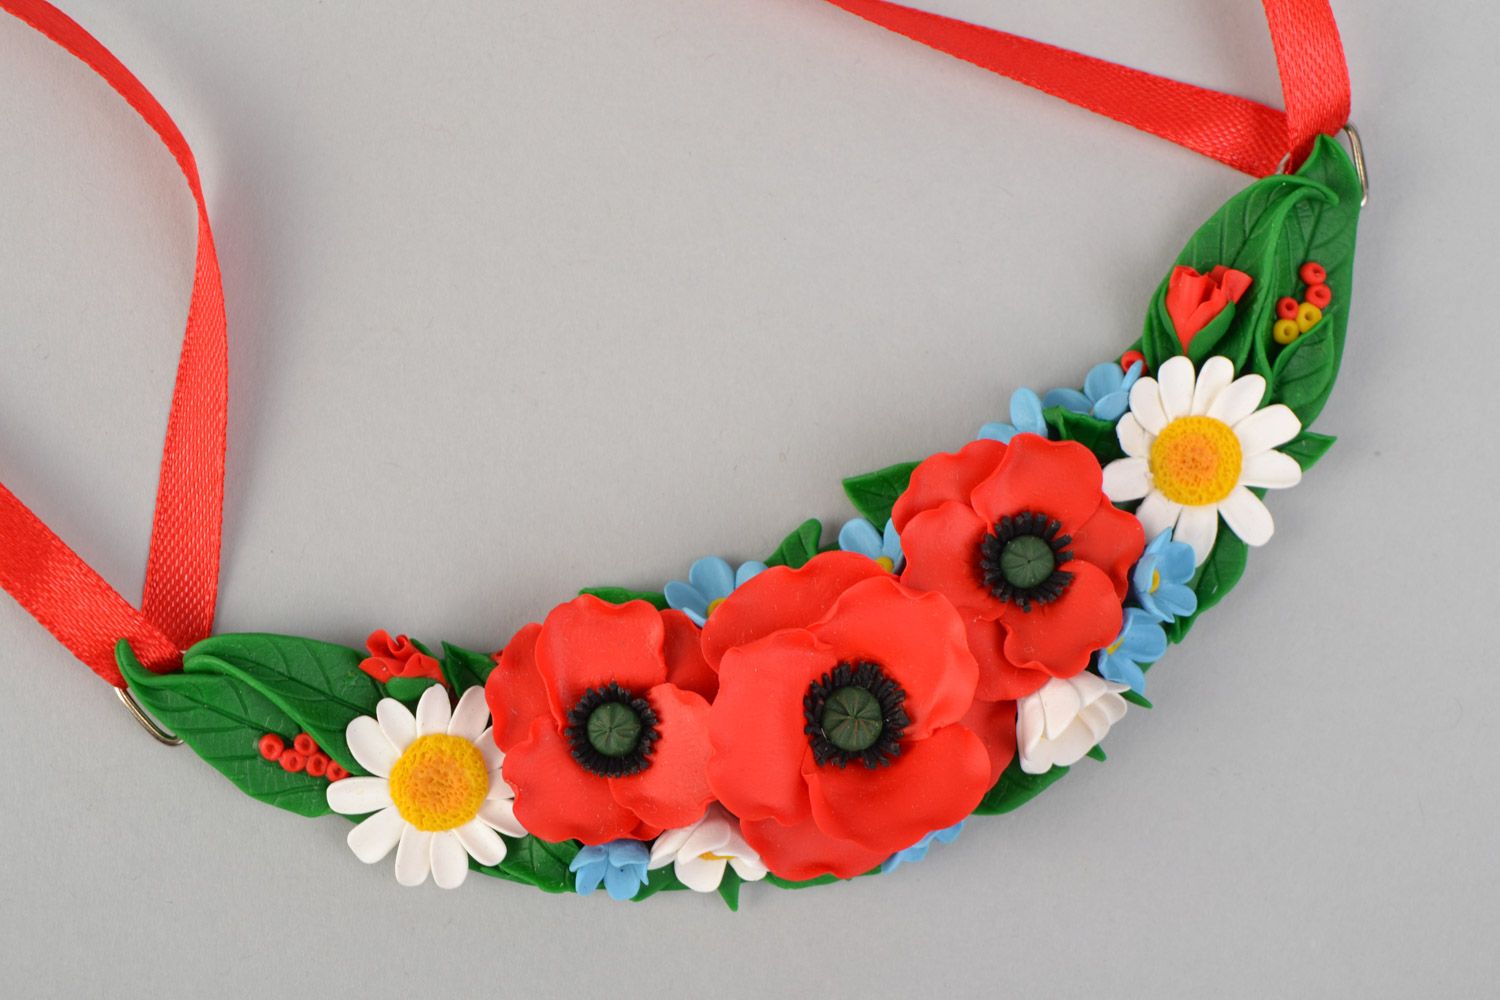 Festive handmade polymer clay colorful floral necklace on red satin ribbon photo 3